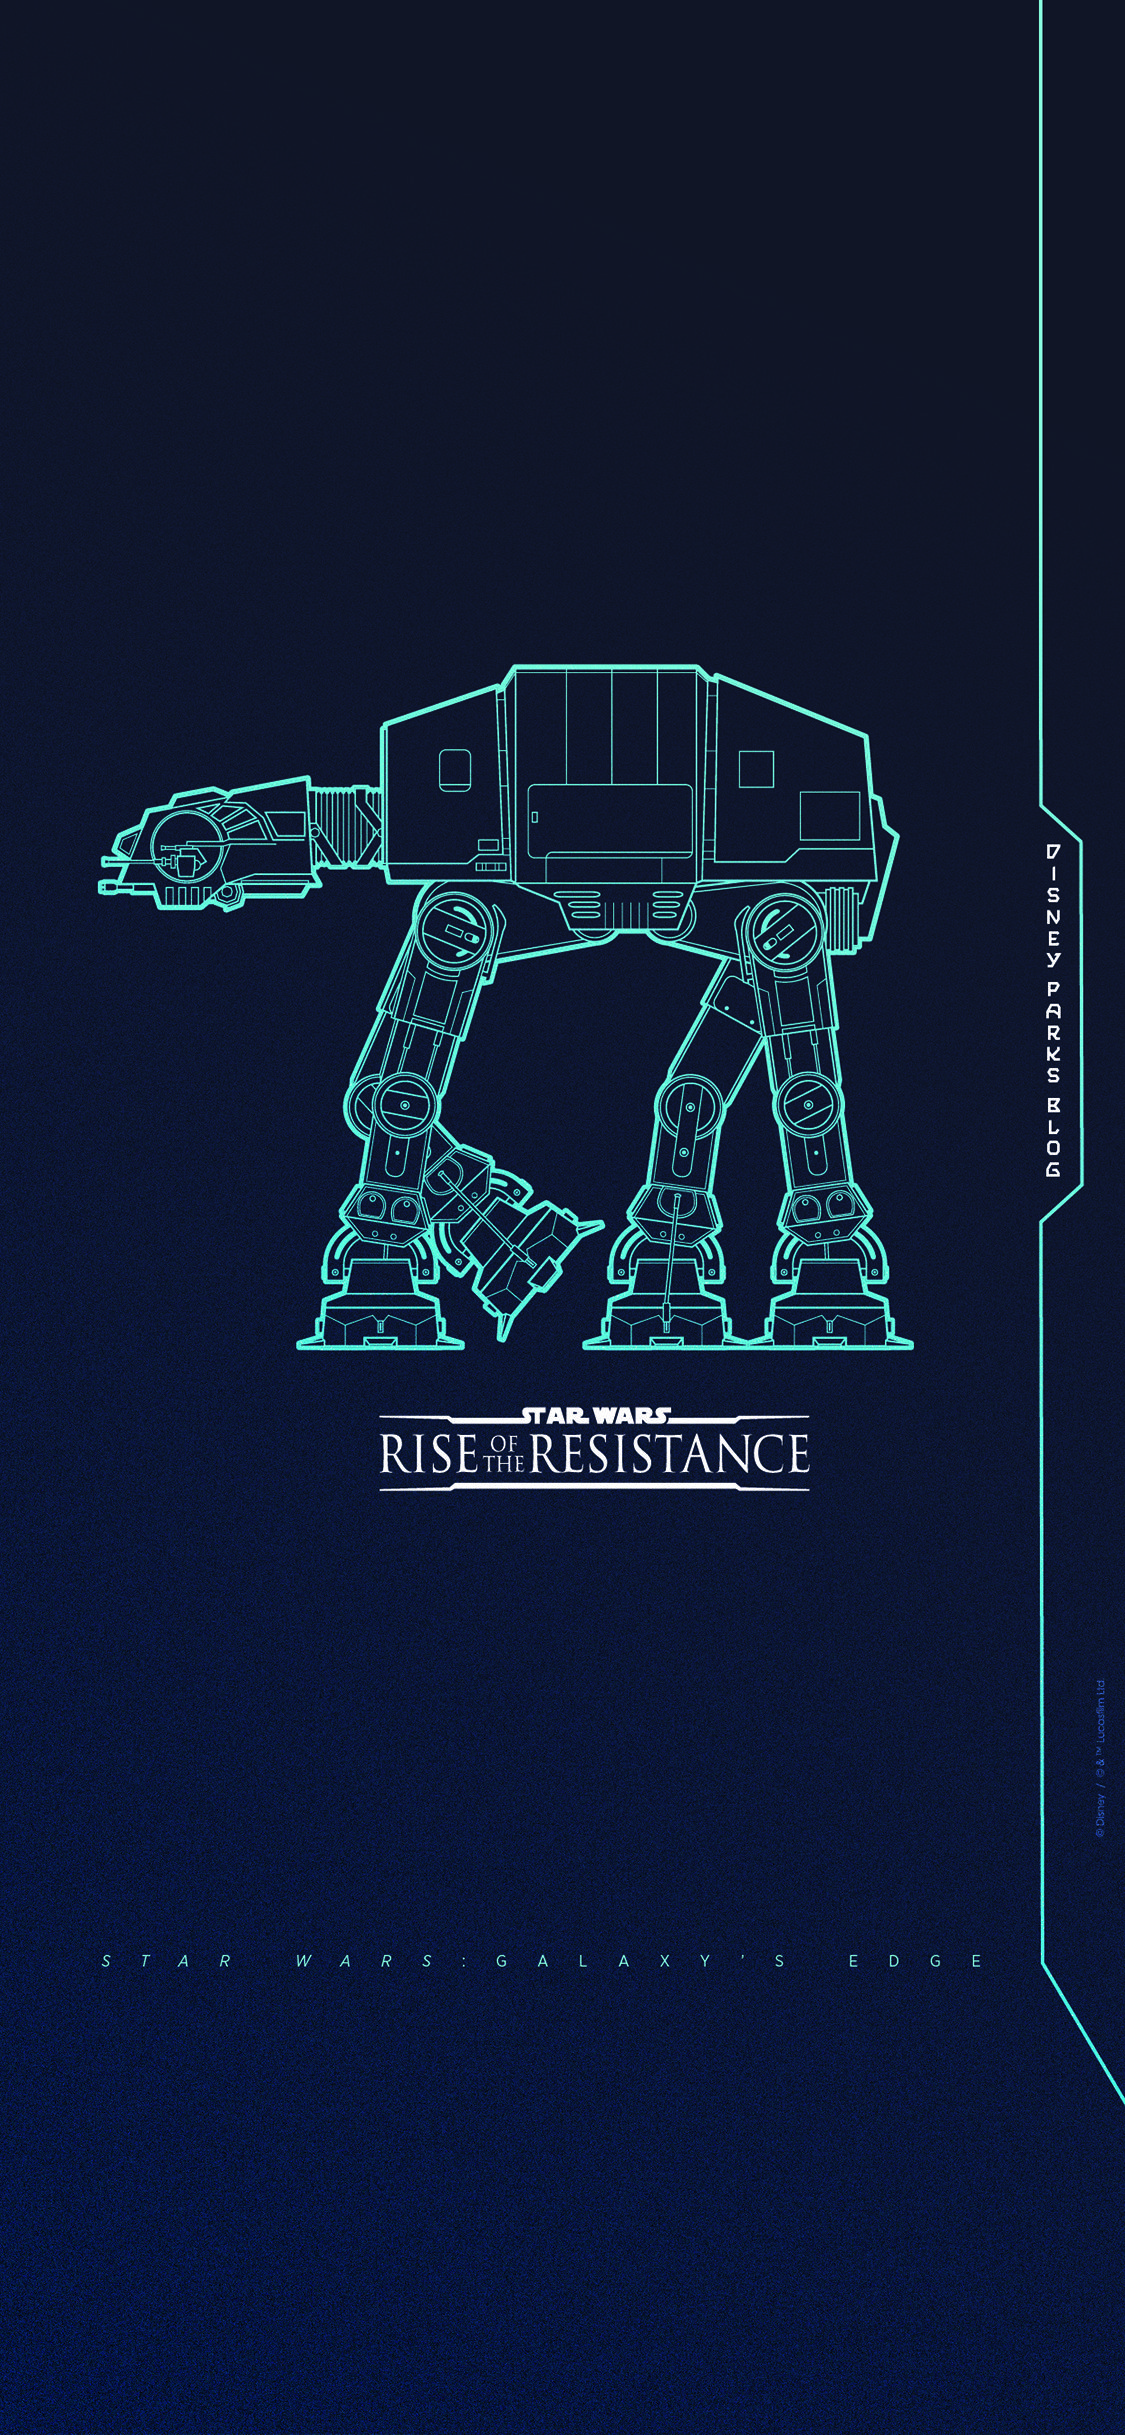 1125x2435 Star Wars Rise Of The Resistance 8211 Iphone Android Wallpaper Disney Parks Blog